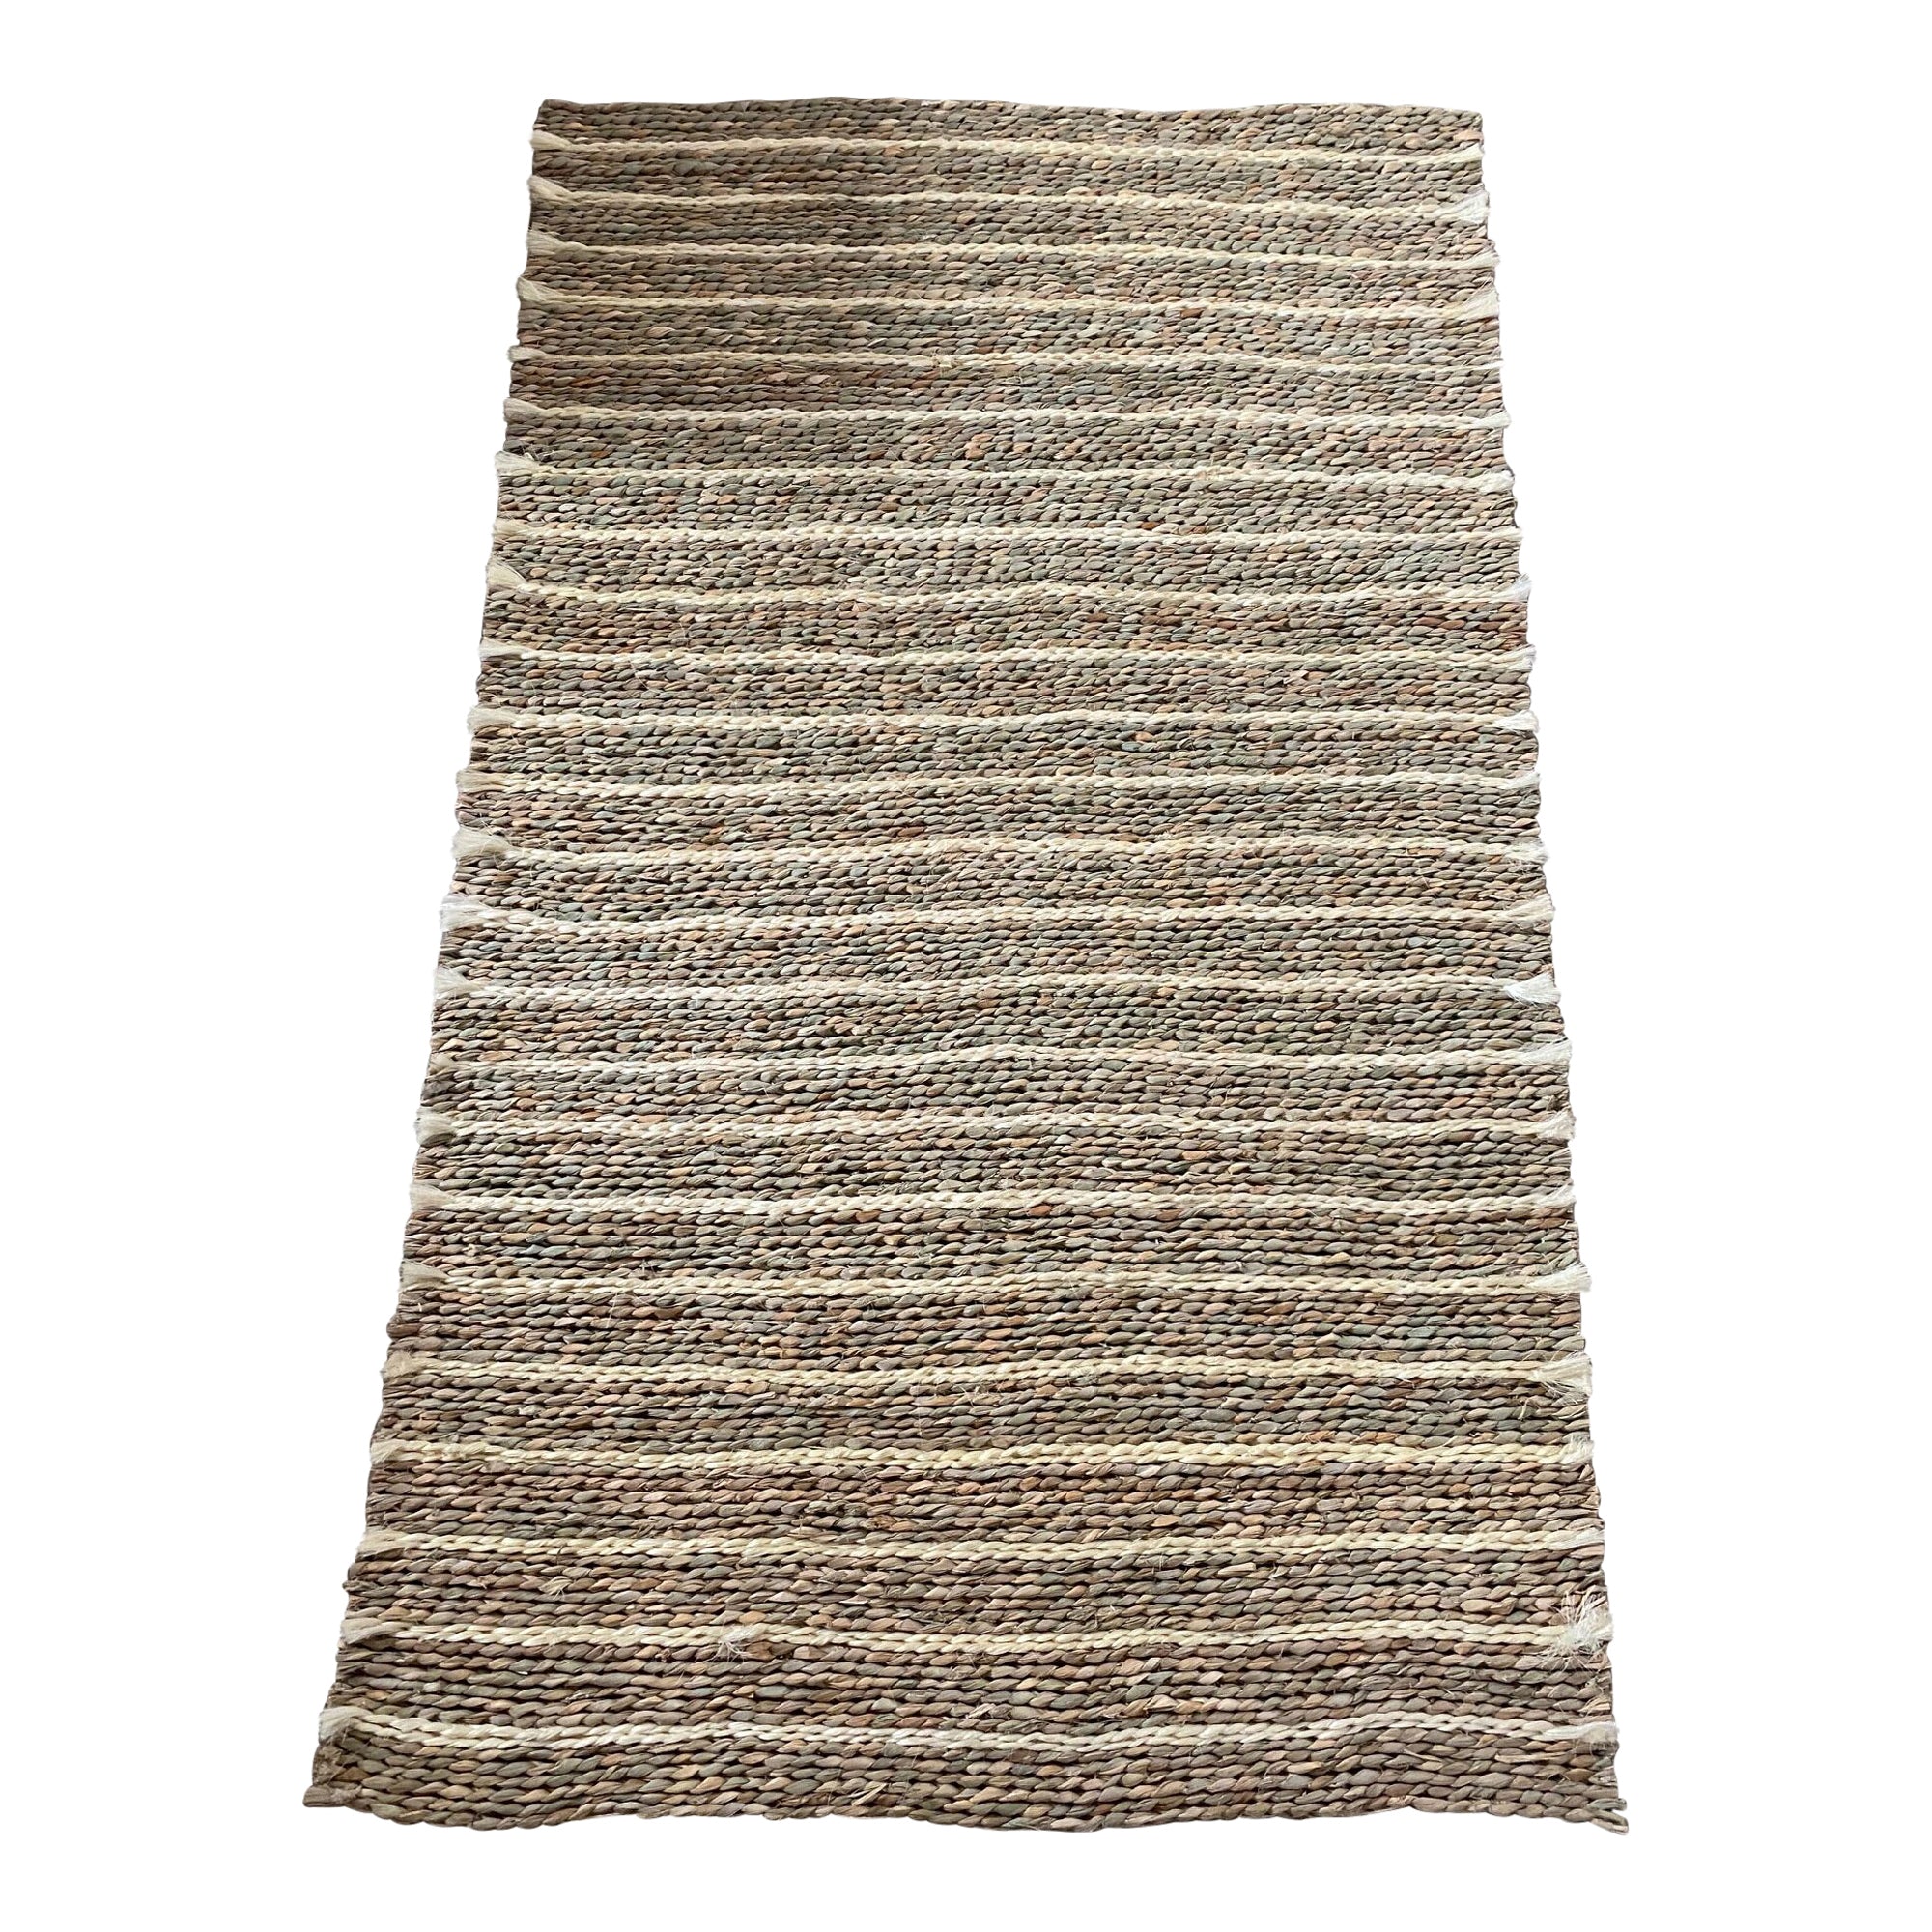 Stripes Seagrass Hall Runner Rug - Small